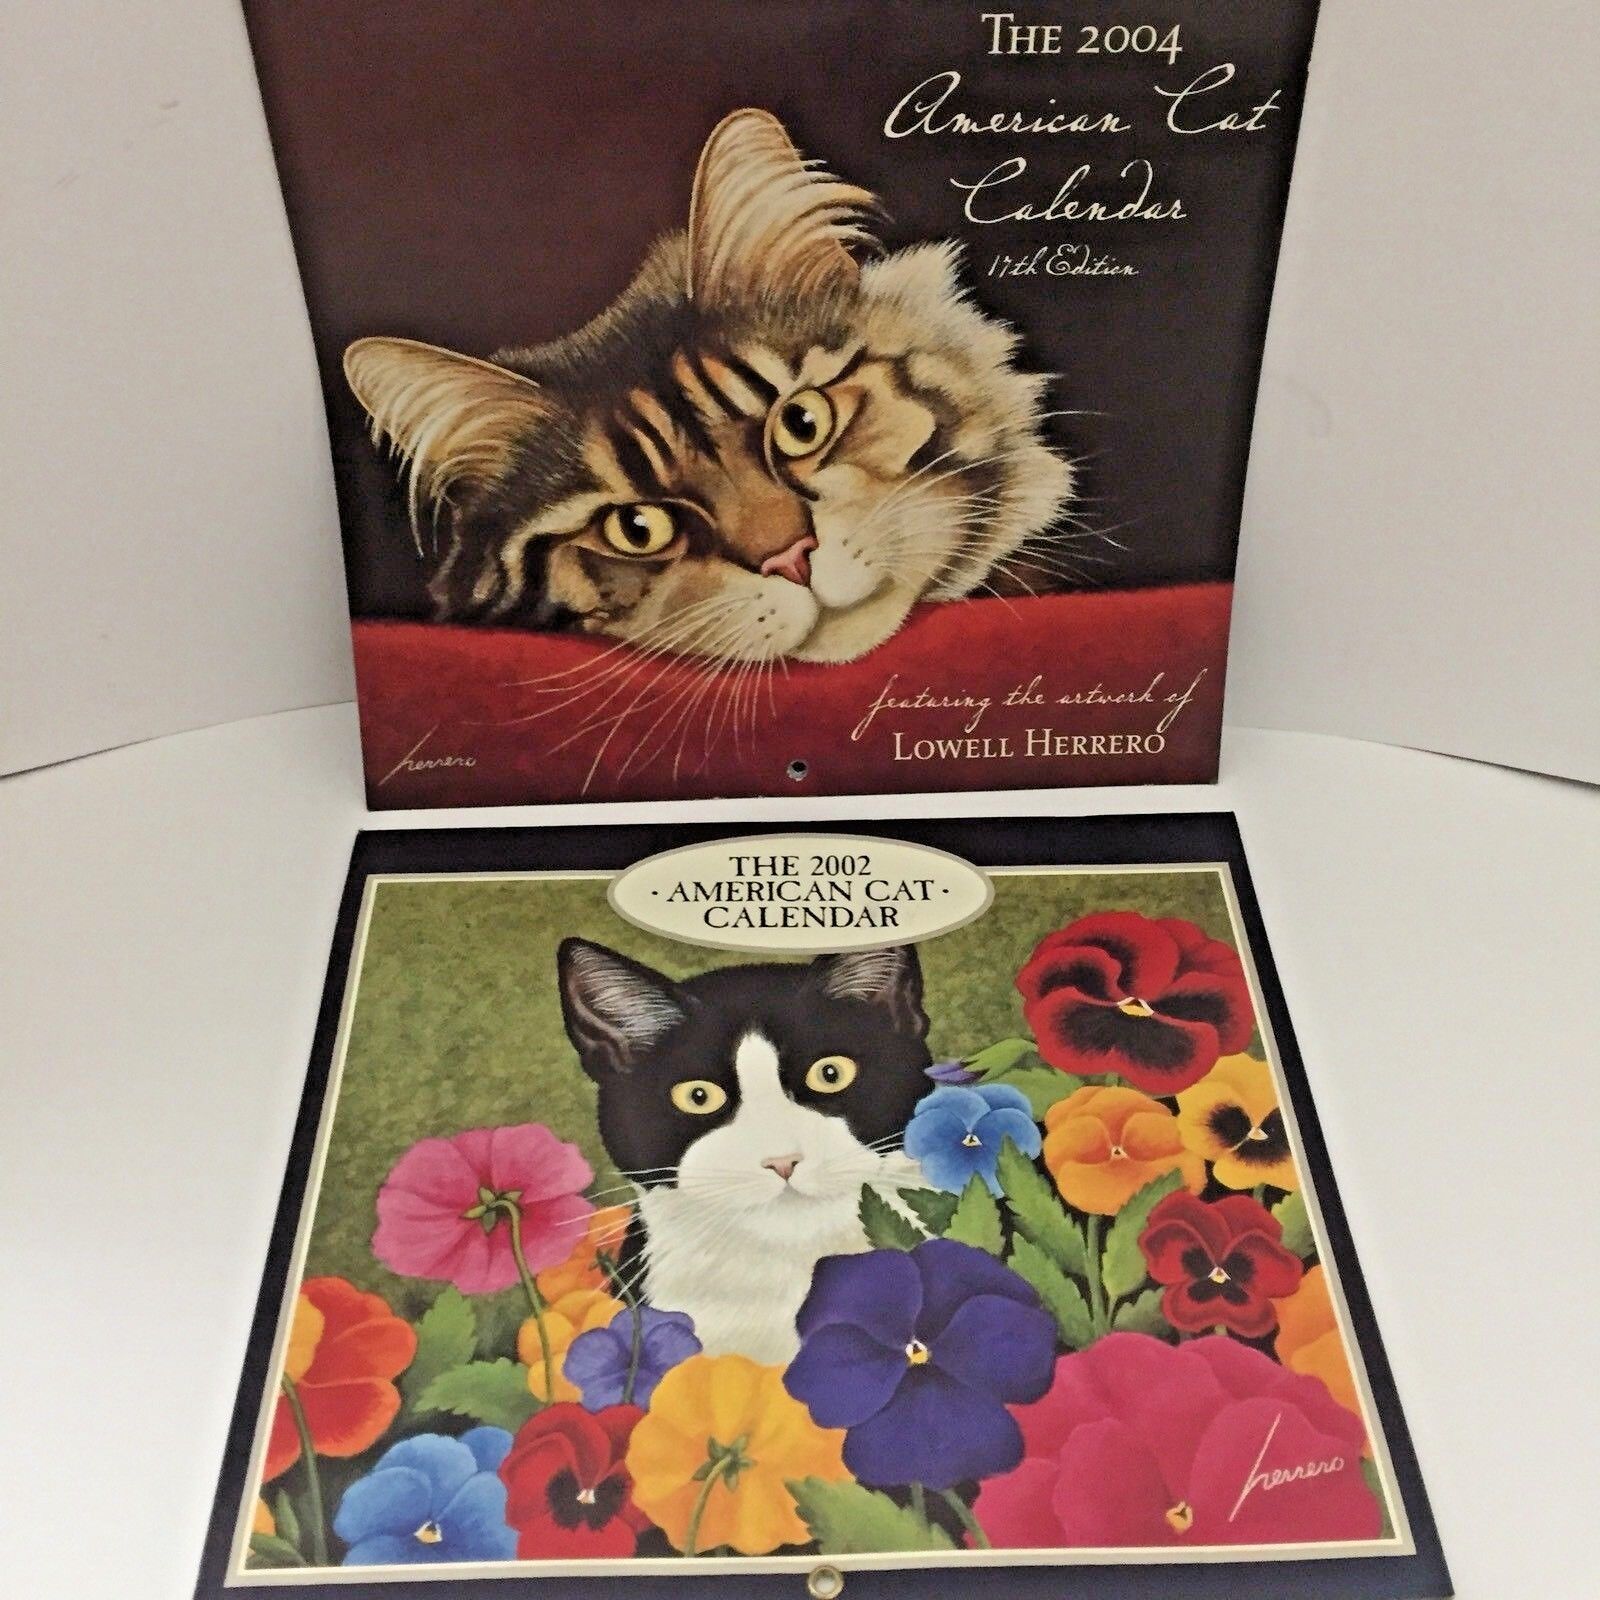 2 Cat Calendars for Crafts, Pictures, Cat Lovers, Out of Date Calendars 02, 04